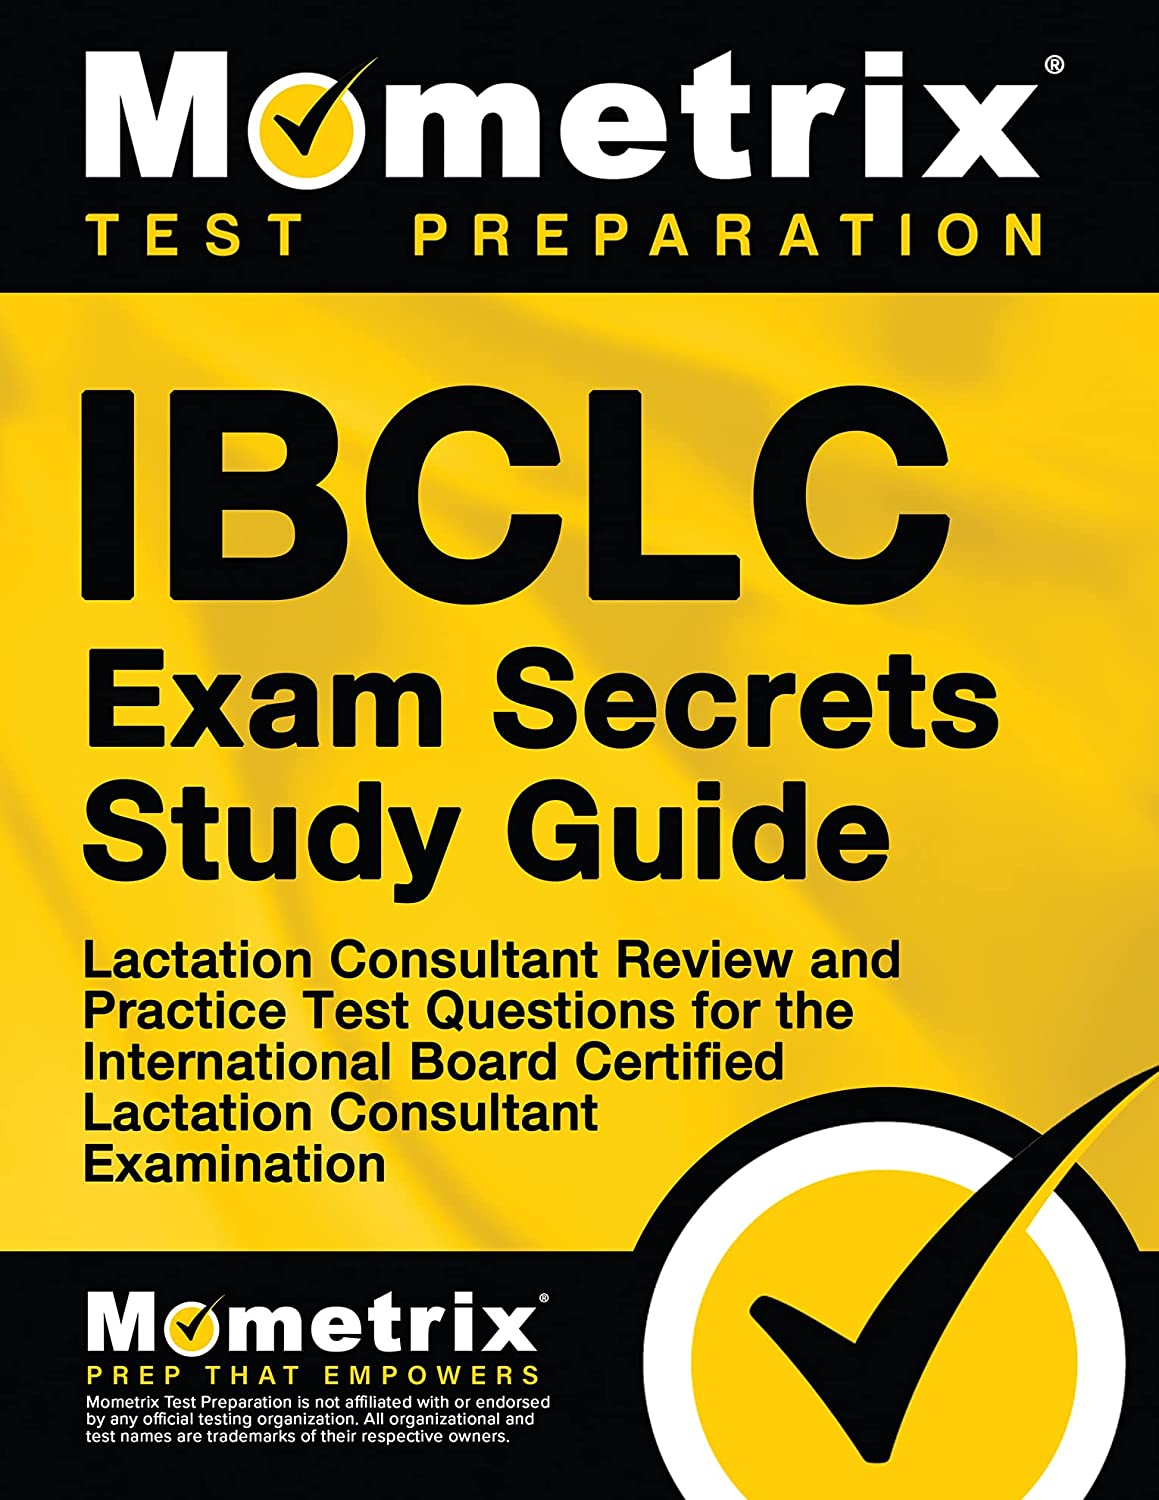 IBCLC Exam Secrets Study Guide: Lactation Consultant Review and Practice Test Questions for the International Board Certified Lactation Consultant Examination